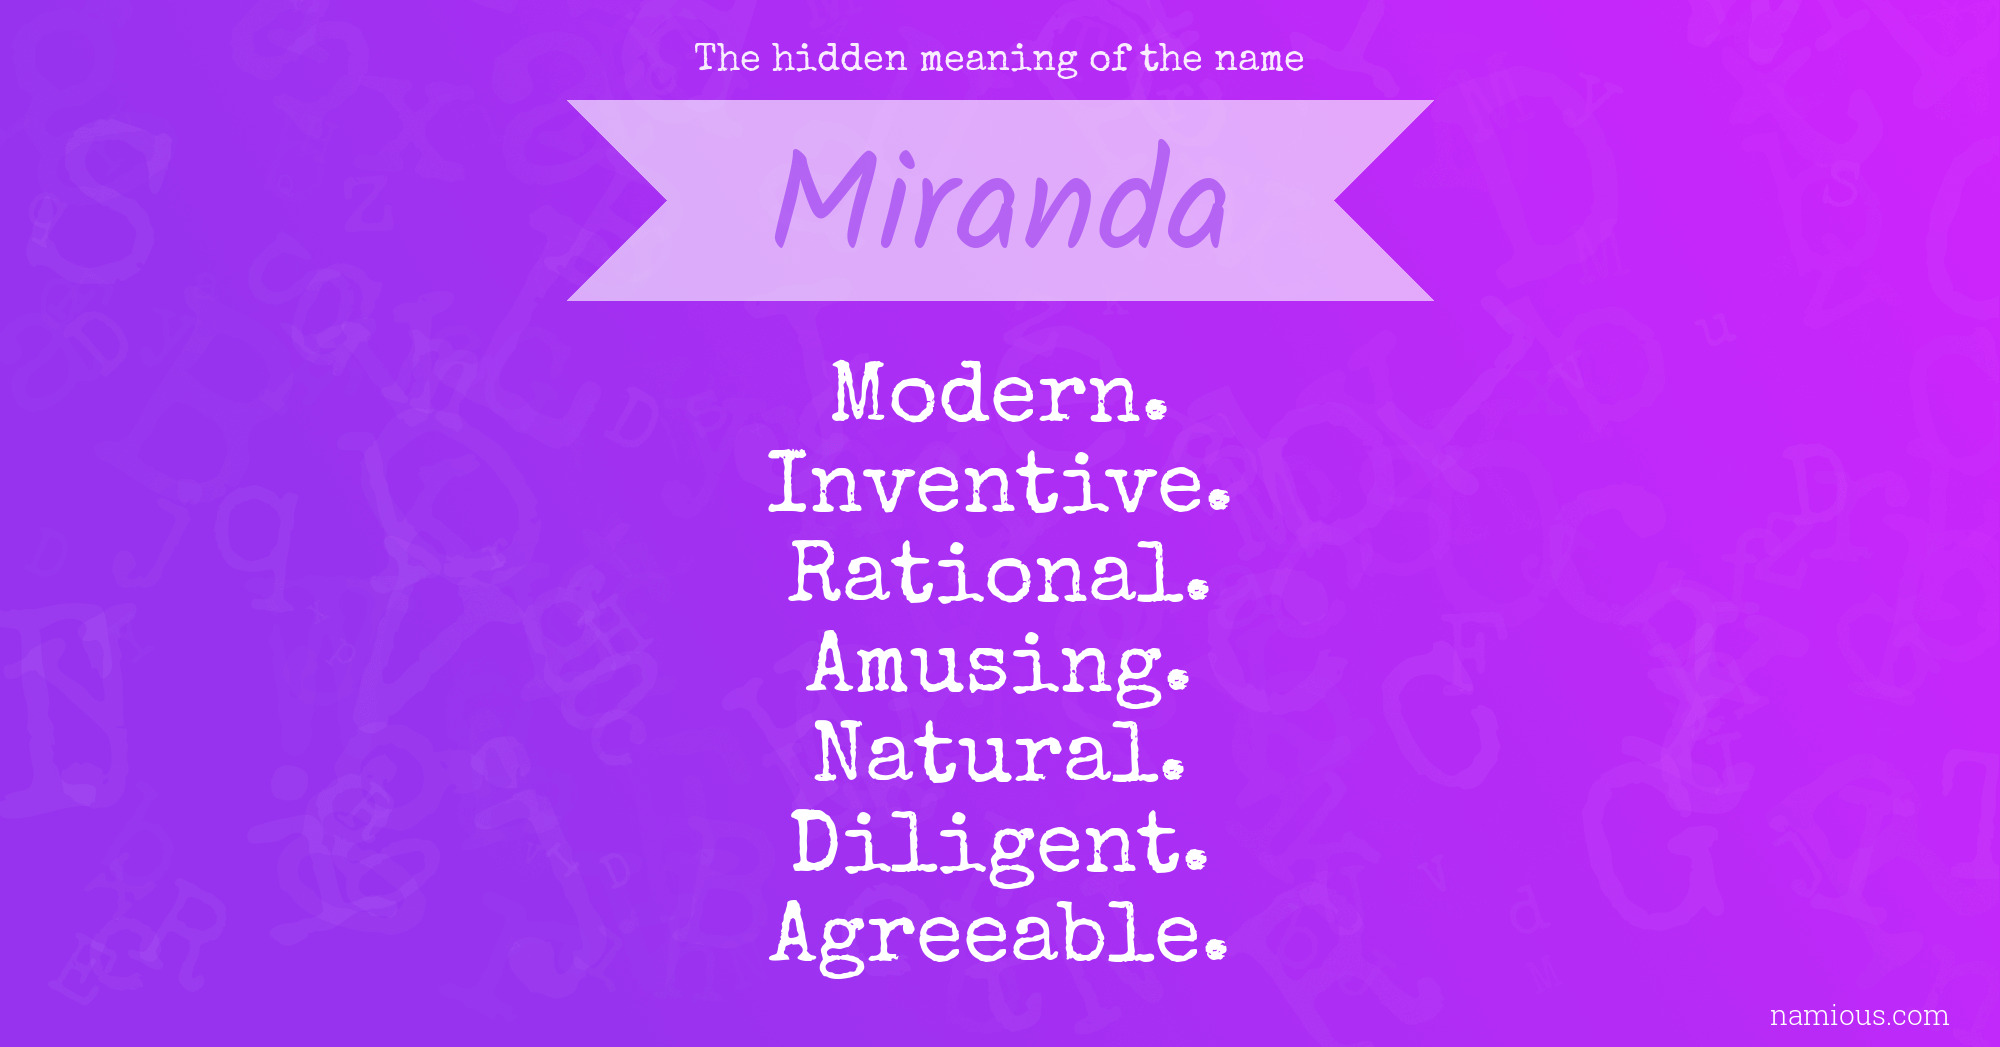 The hidden meaning of the name Miranda